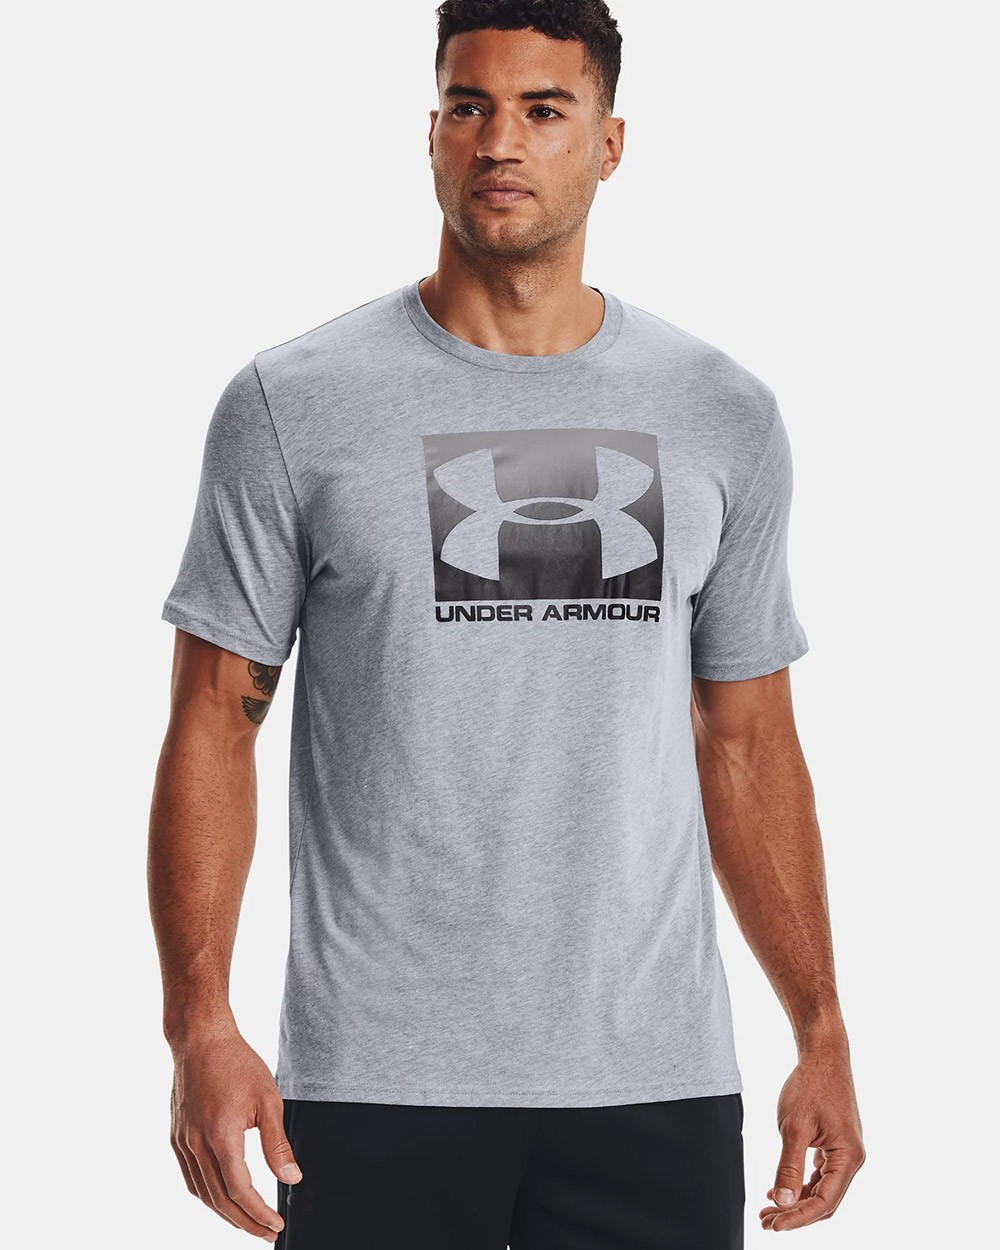 ARMOR Sportstyle Boxed T-Shirt UNDER -